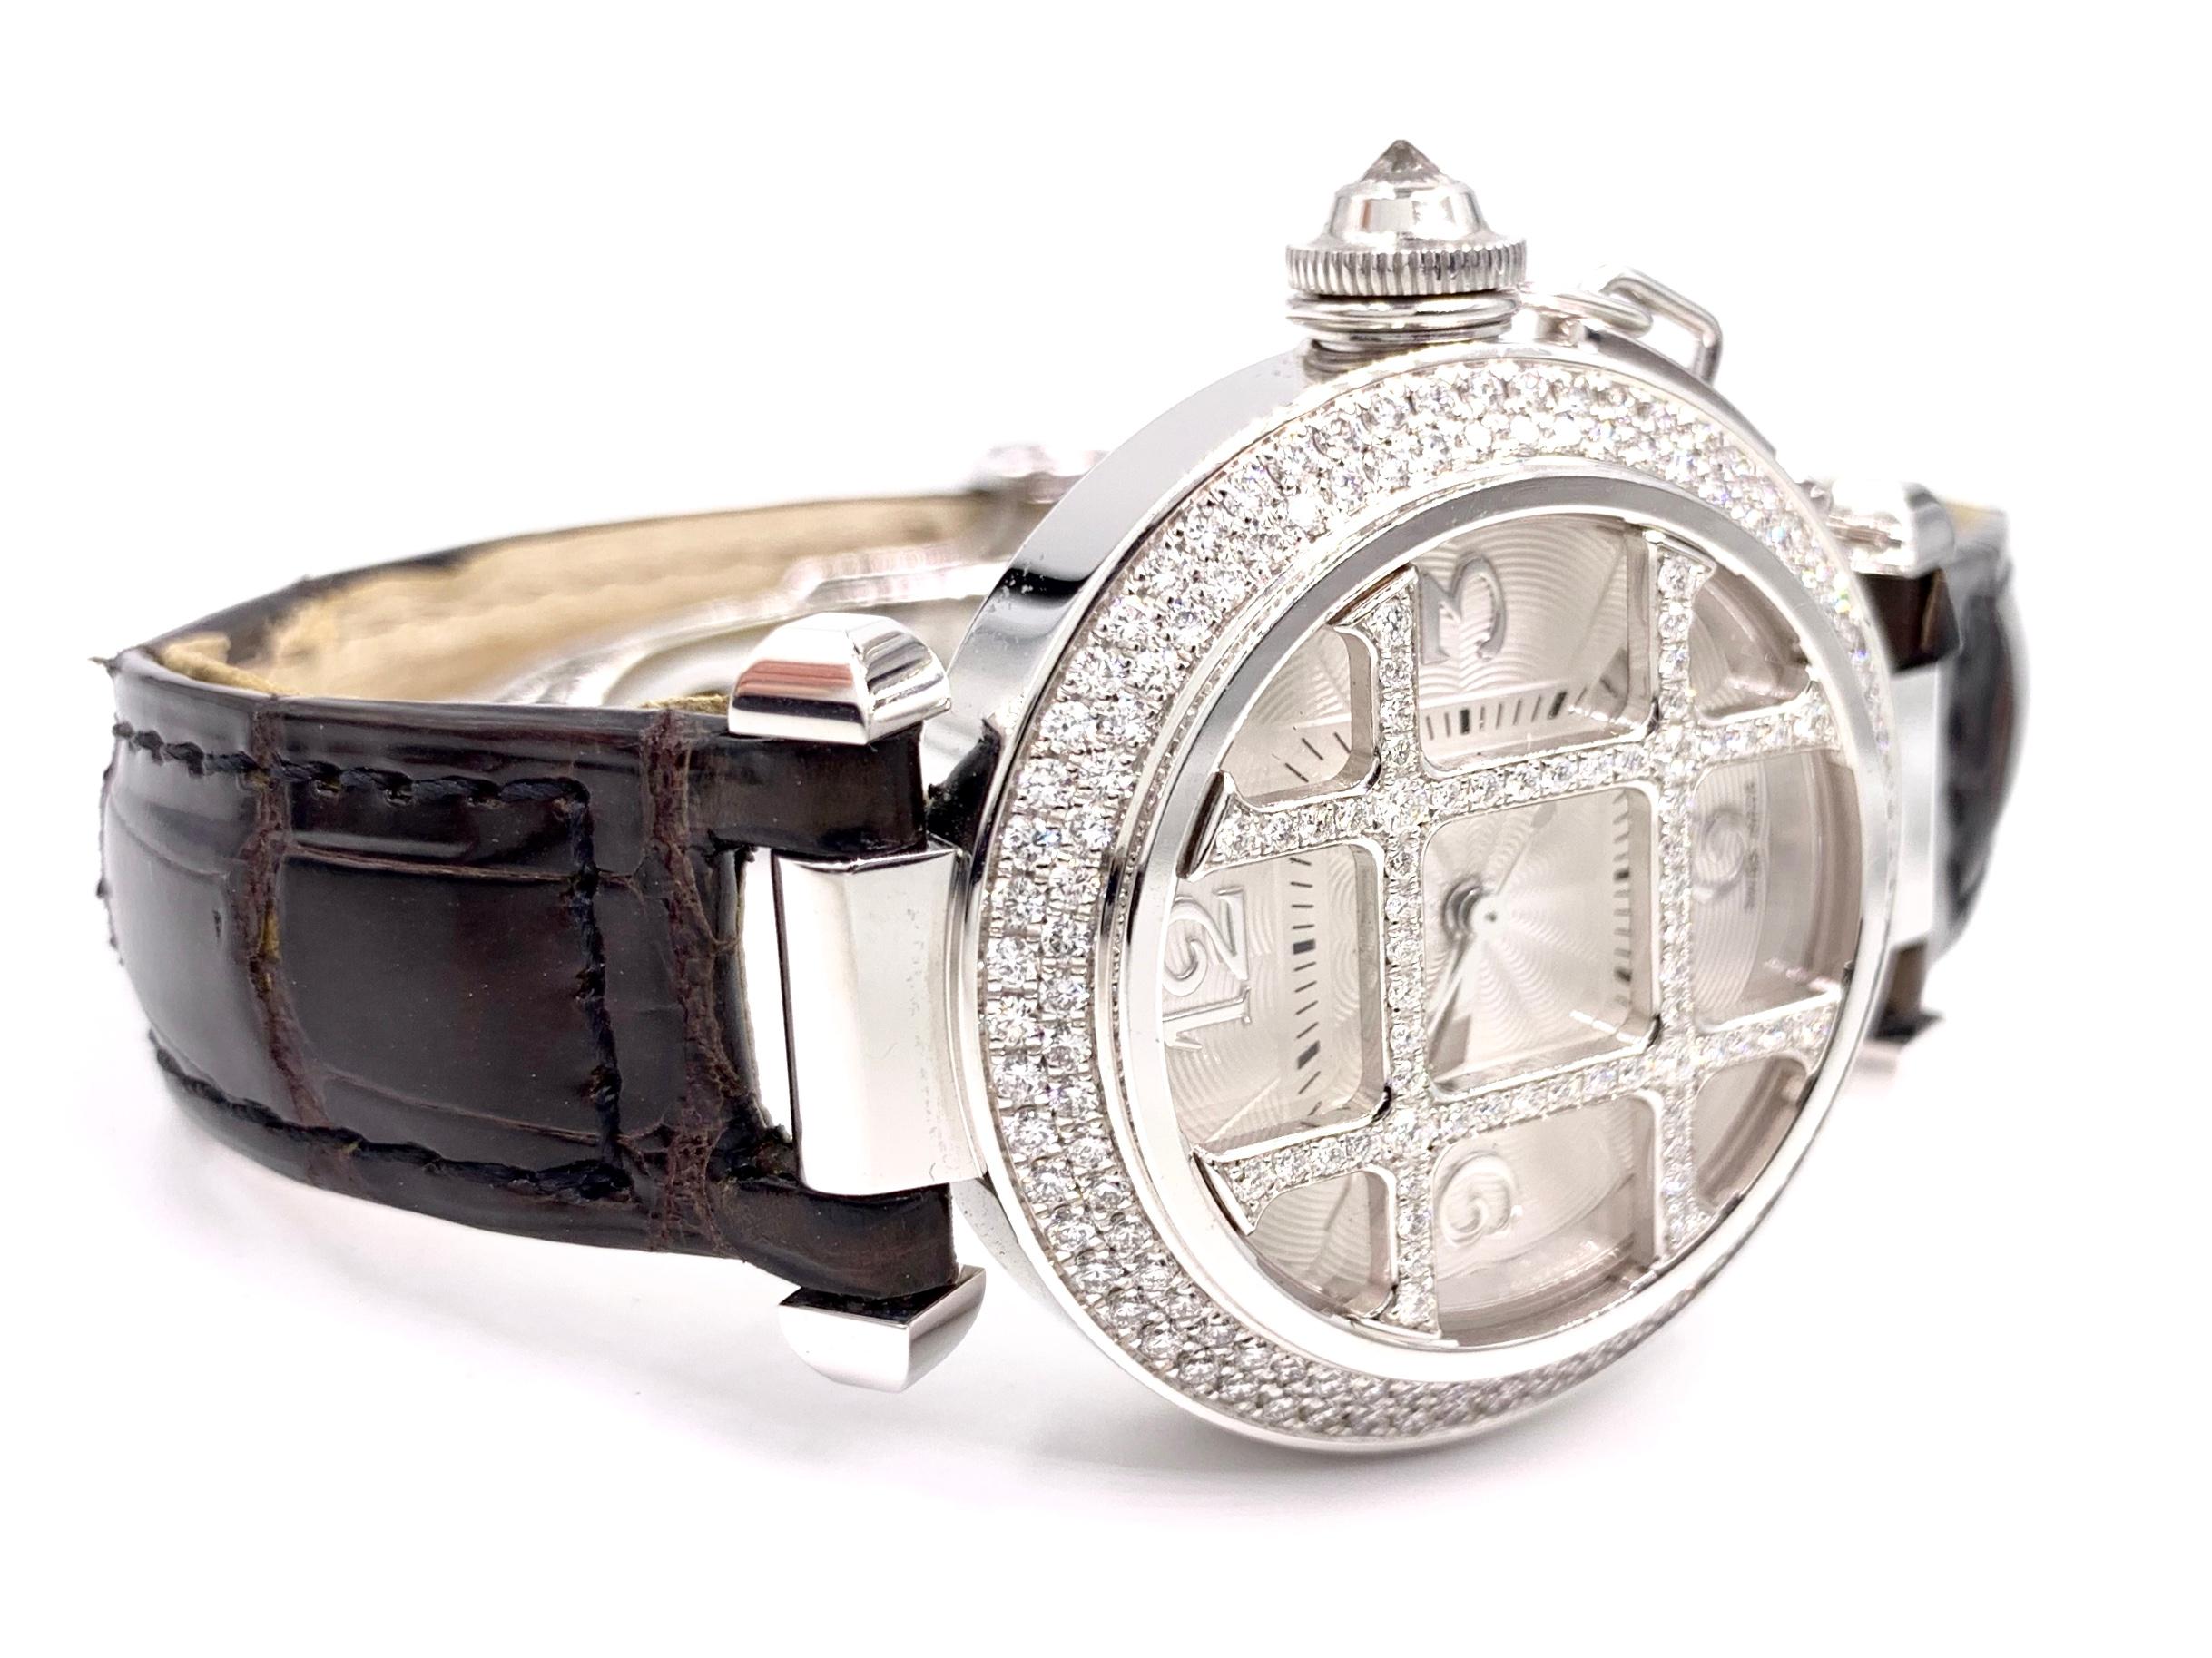 18 Karat and Diamond Cartier Pasha Watch WJ111451 In Good Condition For Sale In Pikesville, MD